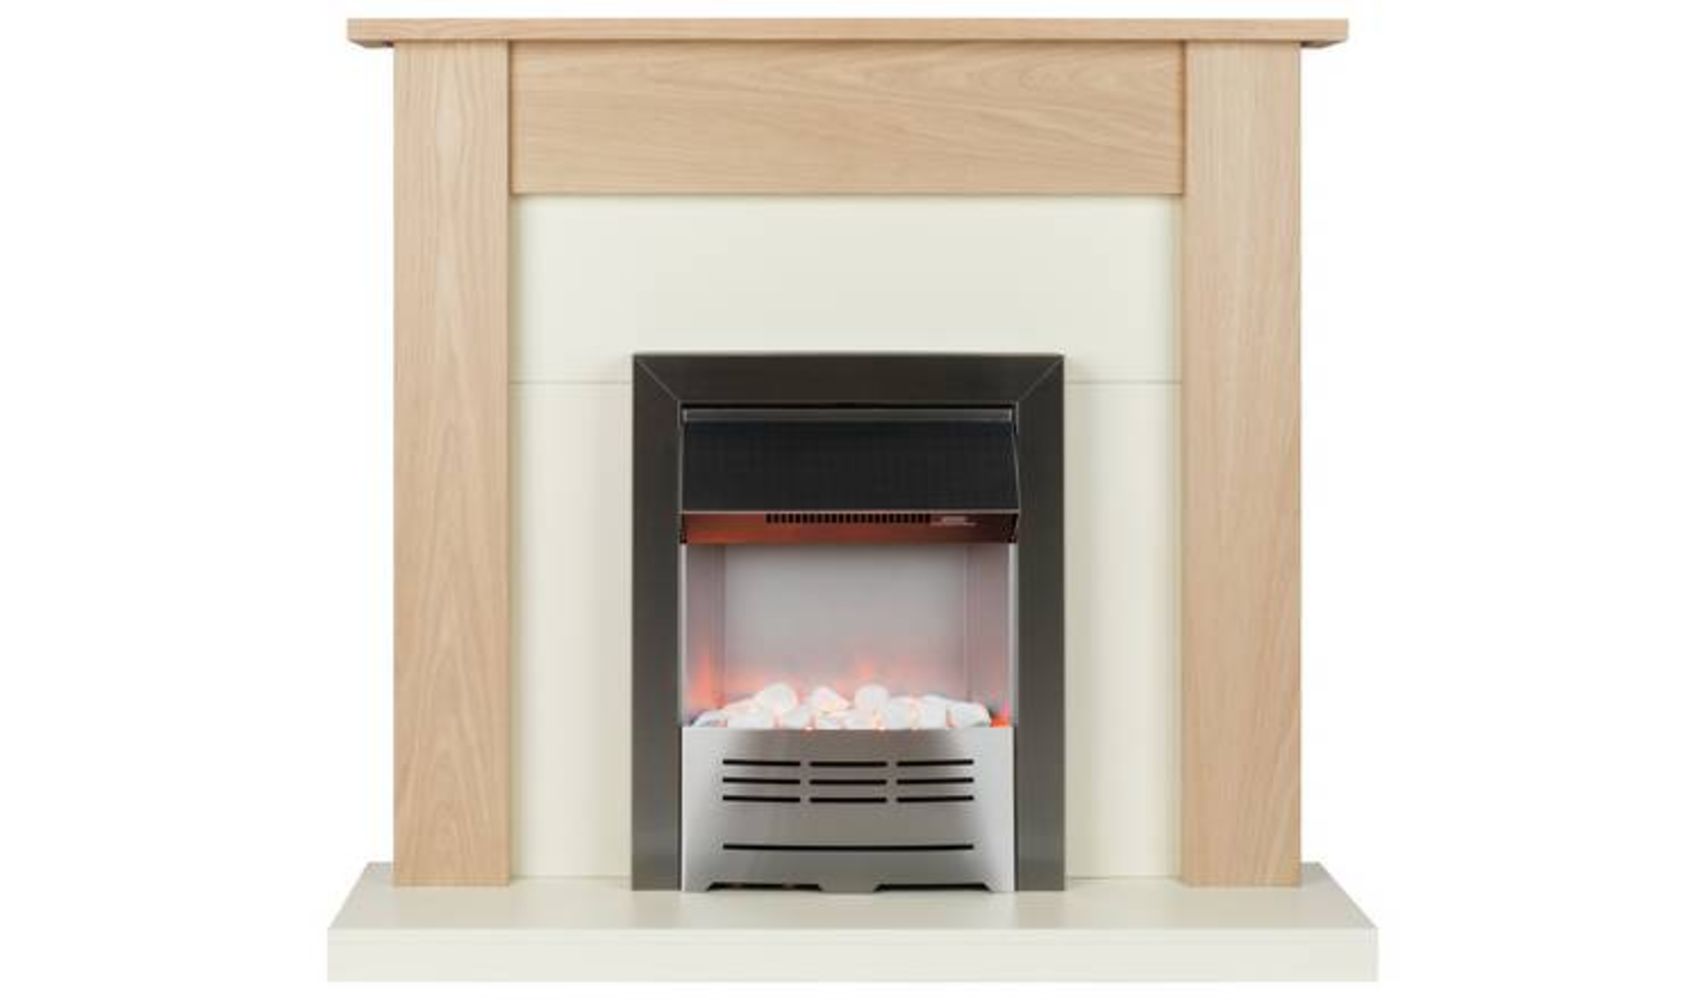 52 x Brand New Boxed Beldray Earlesworth 2kw Electric Fire Suites – Offered for Sale in One Lot